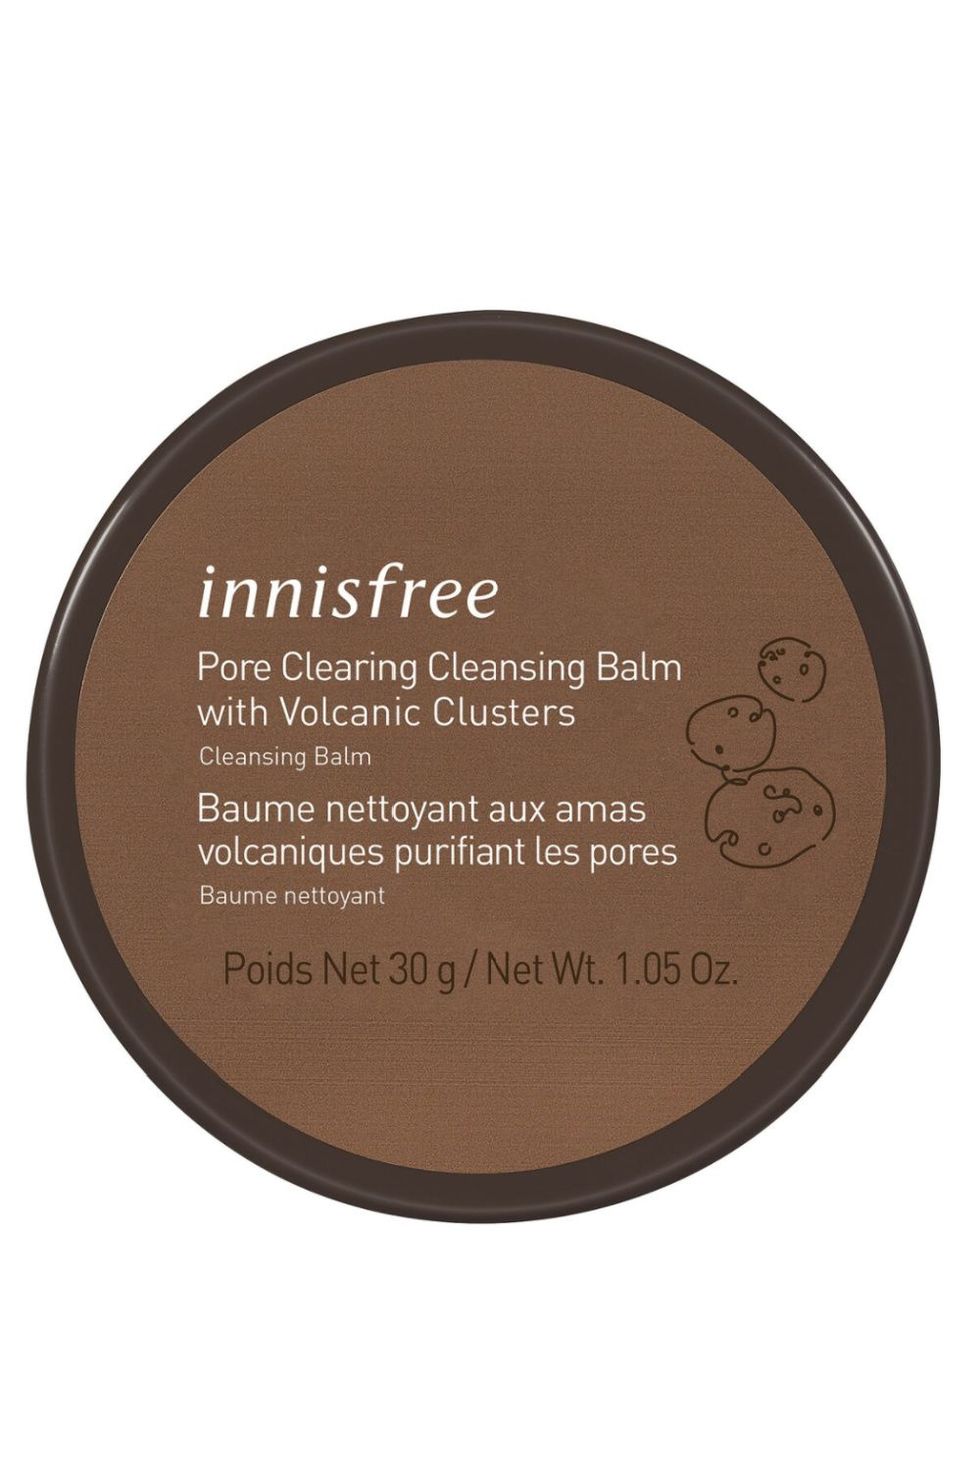 Innisfree Pore Clearing Volcanic Cleansing Balm